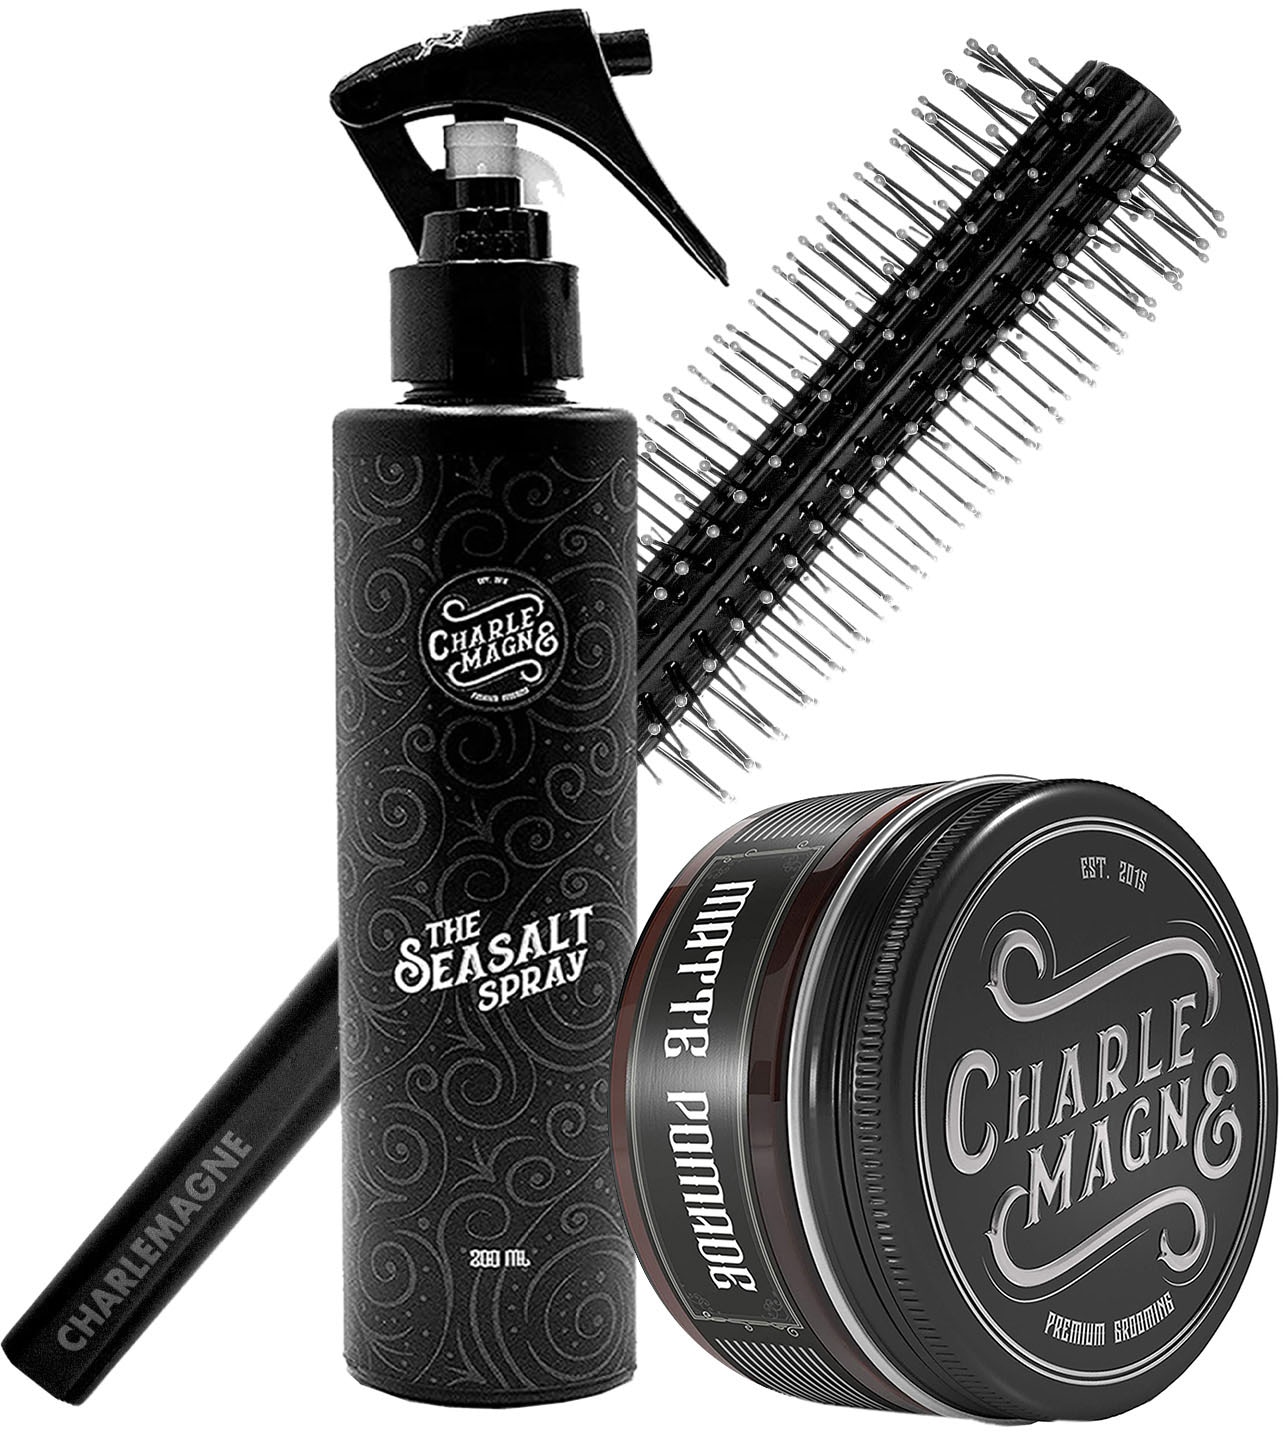 CHARLEMAGNE Haarpflege-Set »Early Morning Grooming Set«, (3 tlg.) online  bei OTTO